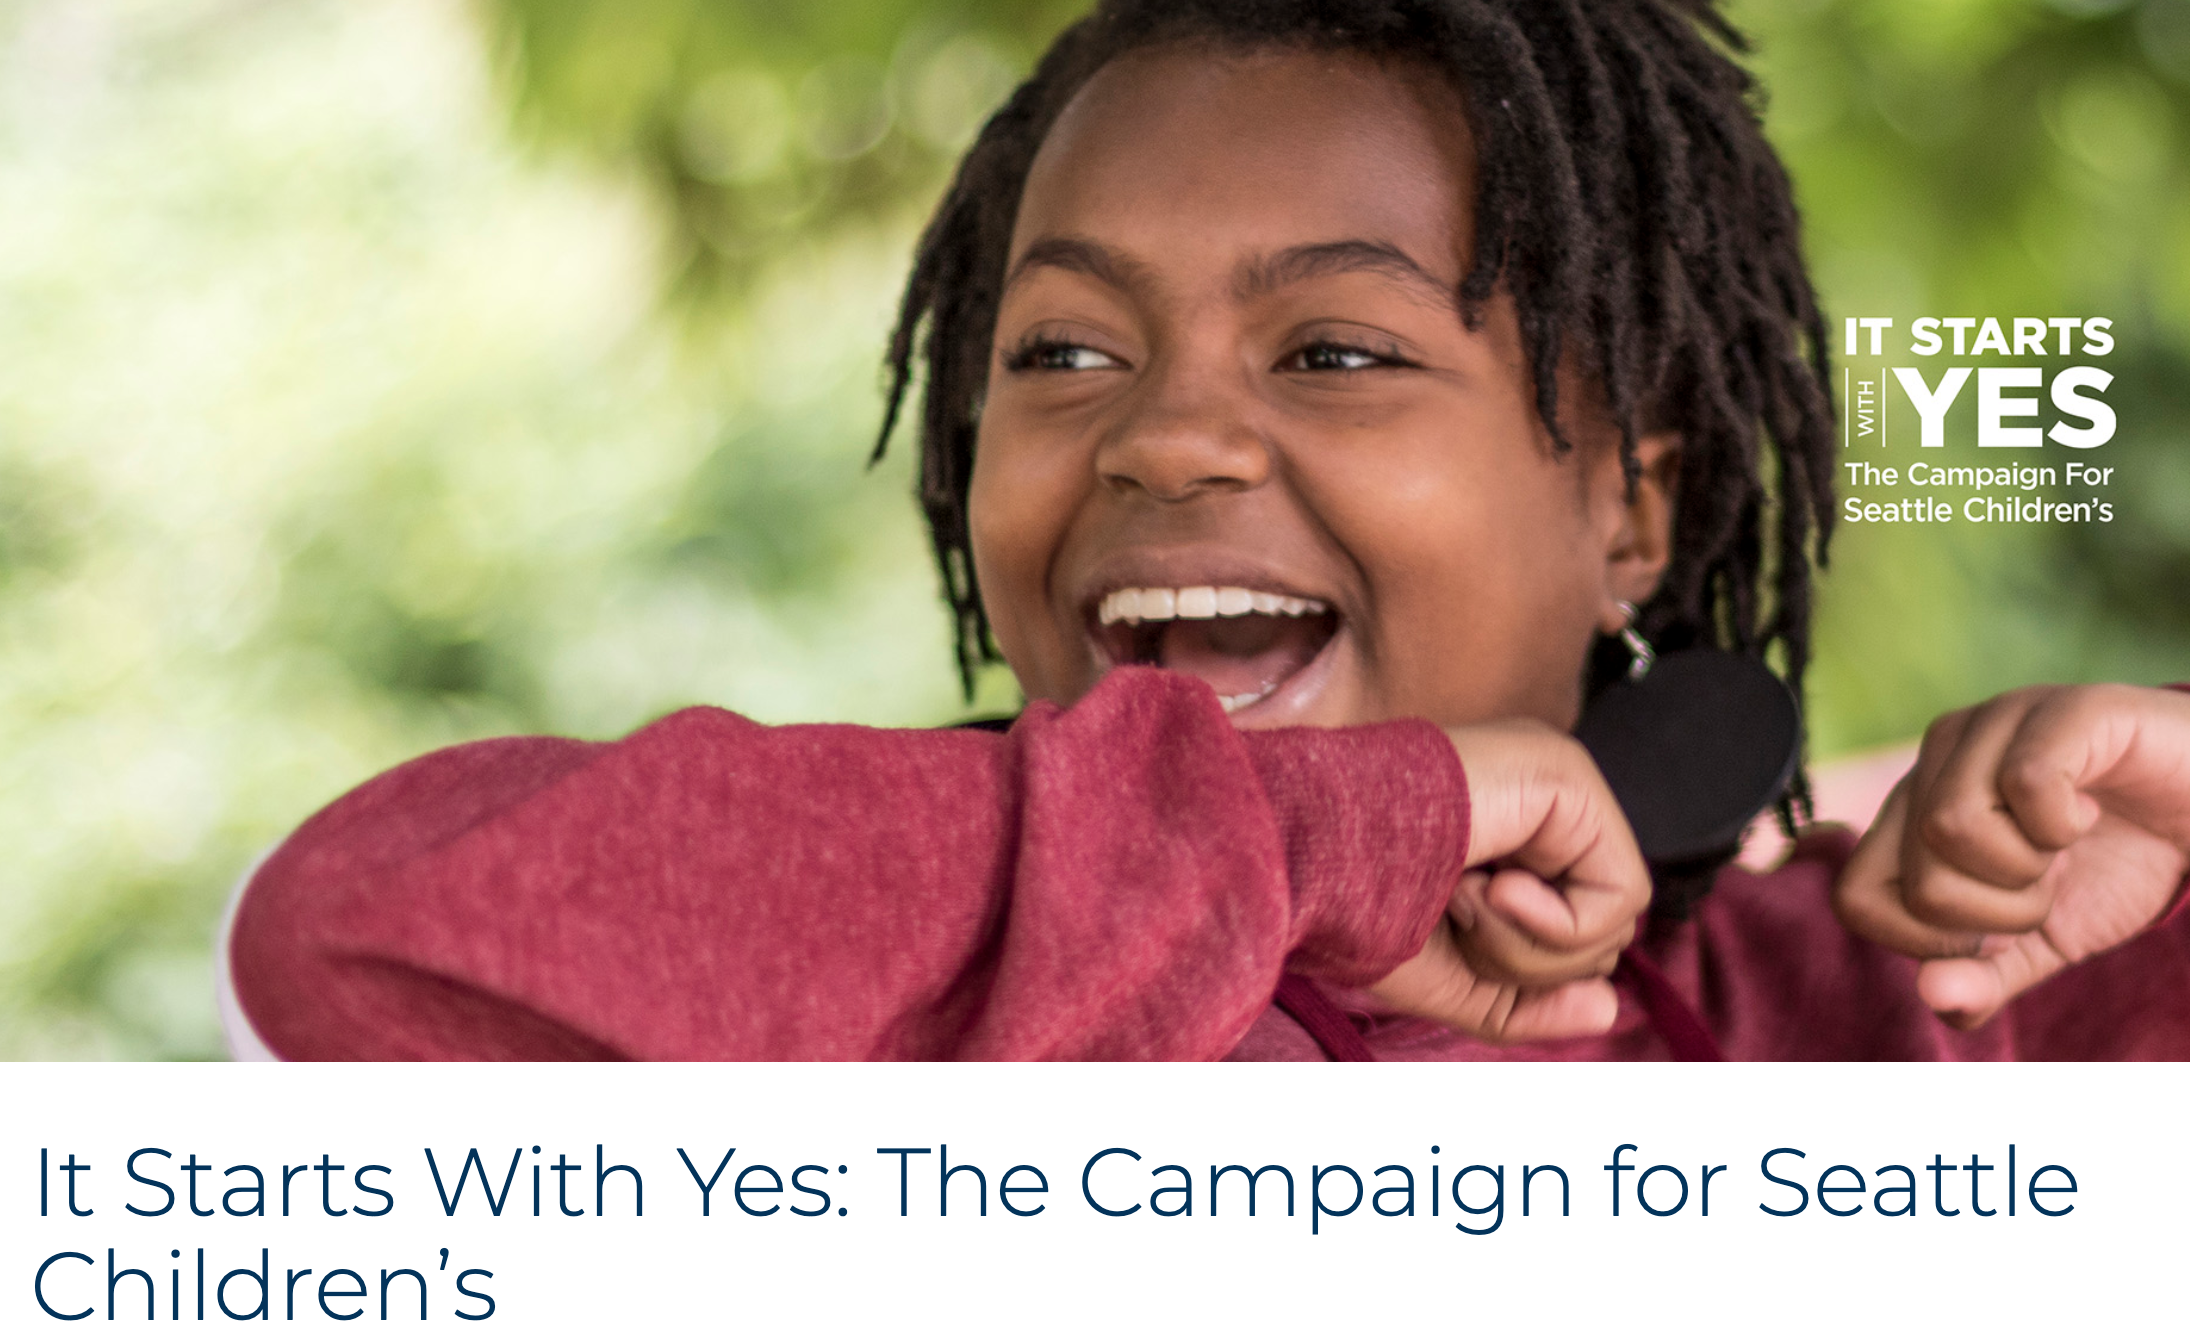 Campaign site for Seattle Children's with a Black person as the background